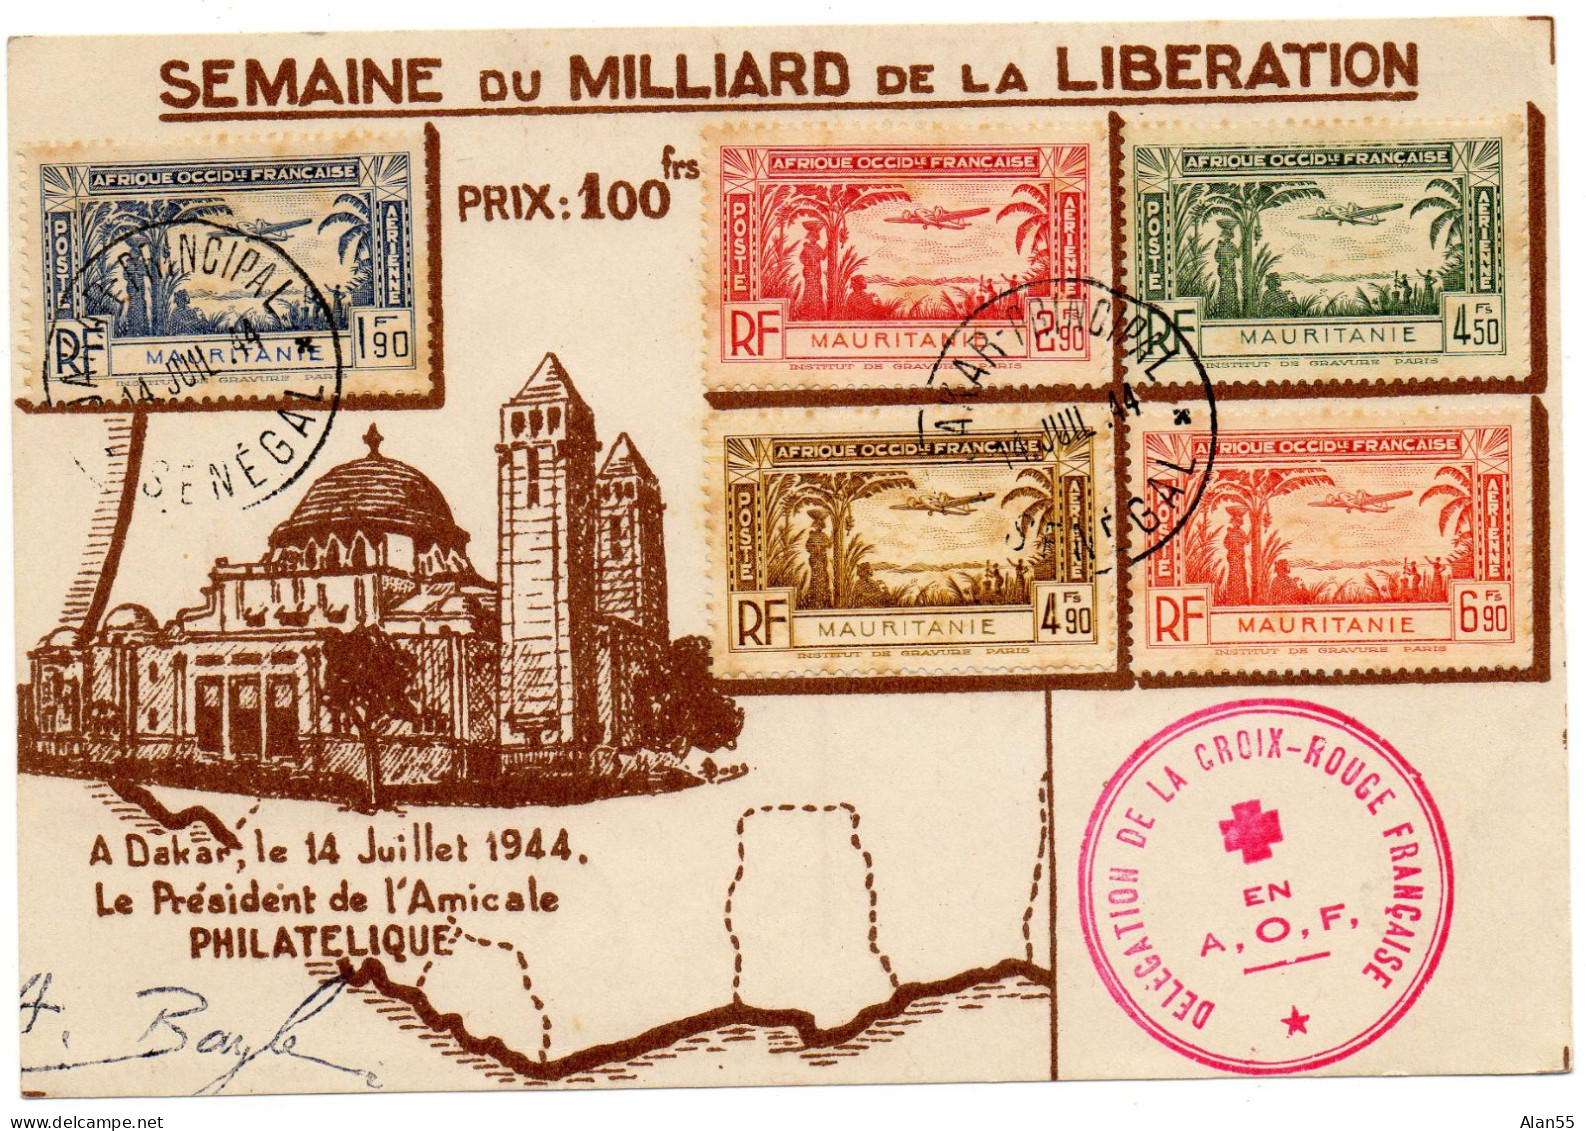 MAURITANIE.1944. LETTRE "DELEGATION CROIX-ROUGE FRANCAISE-A.O.F". - Red Cross